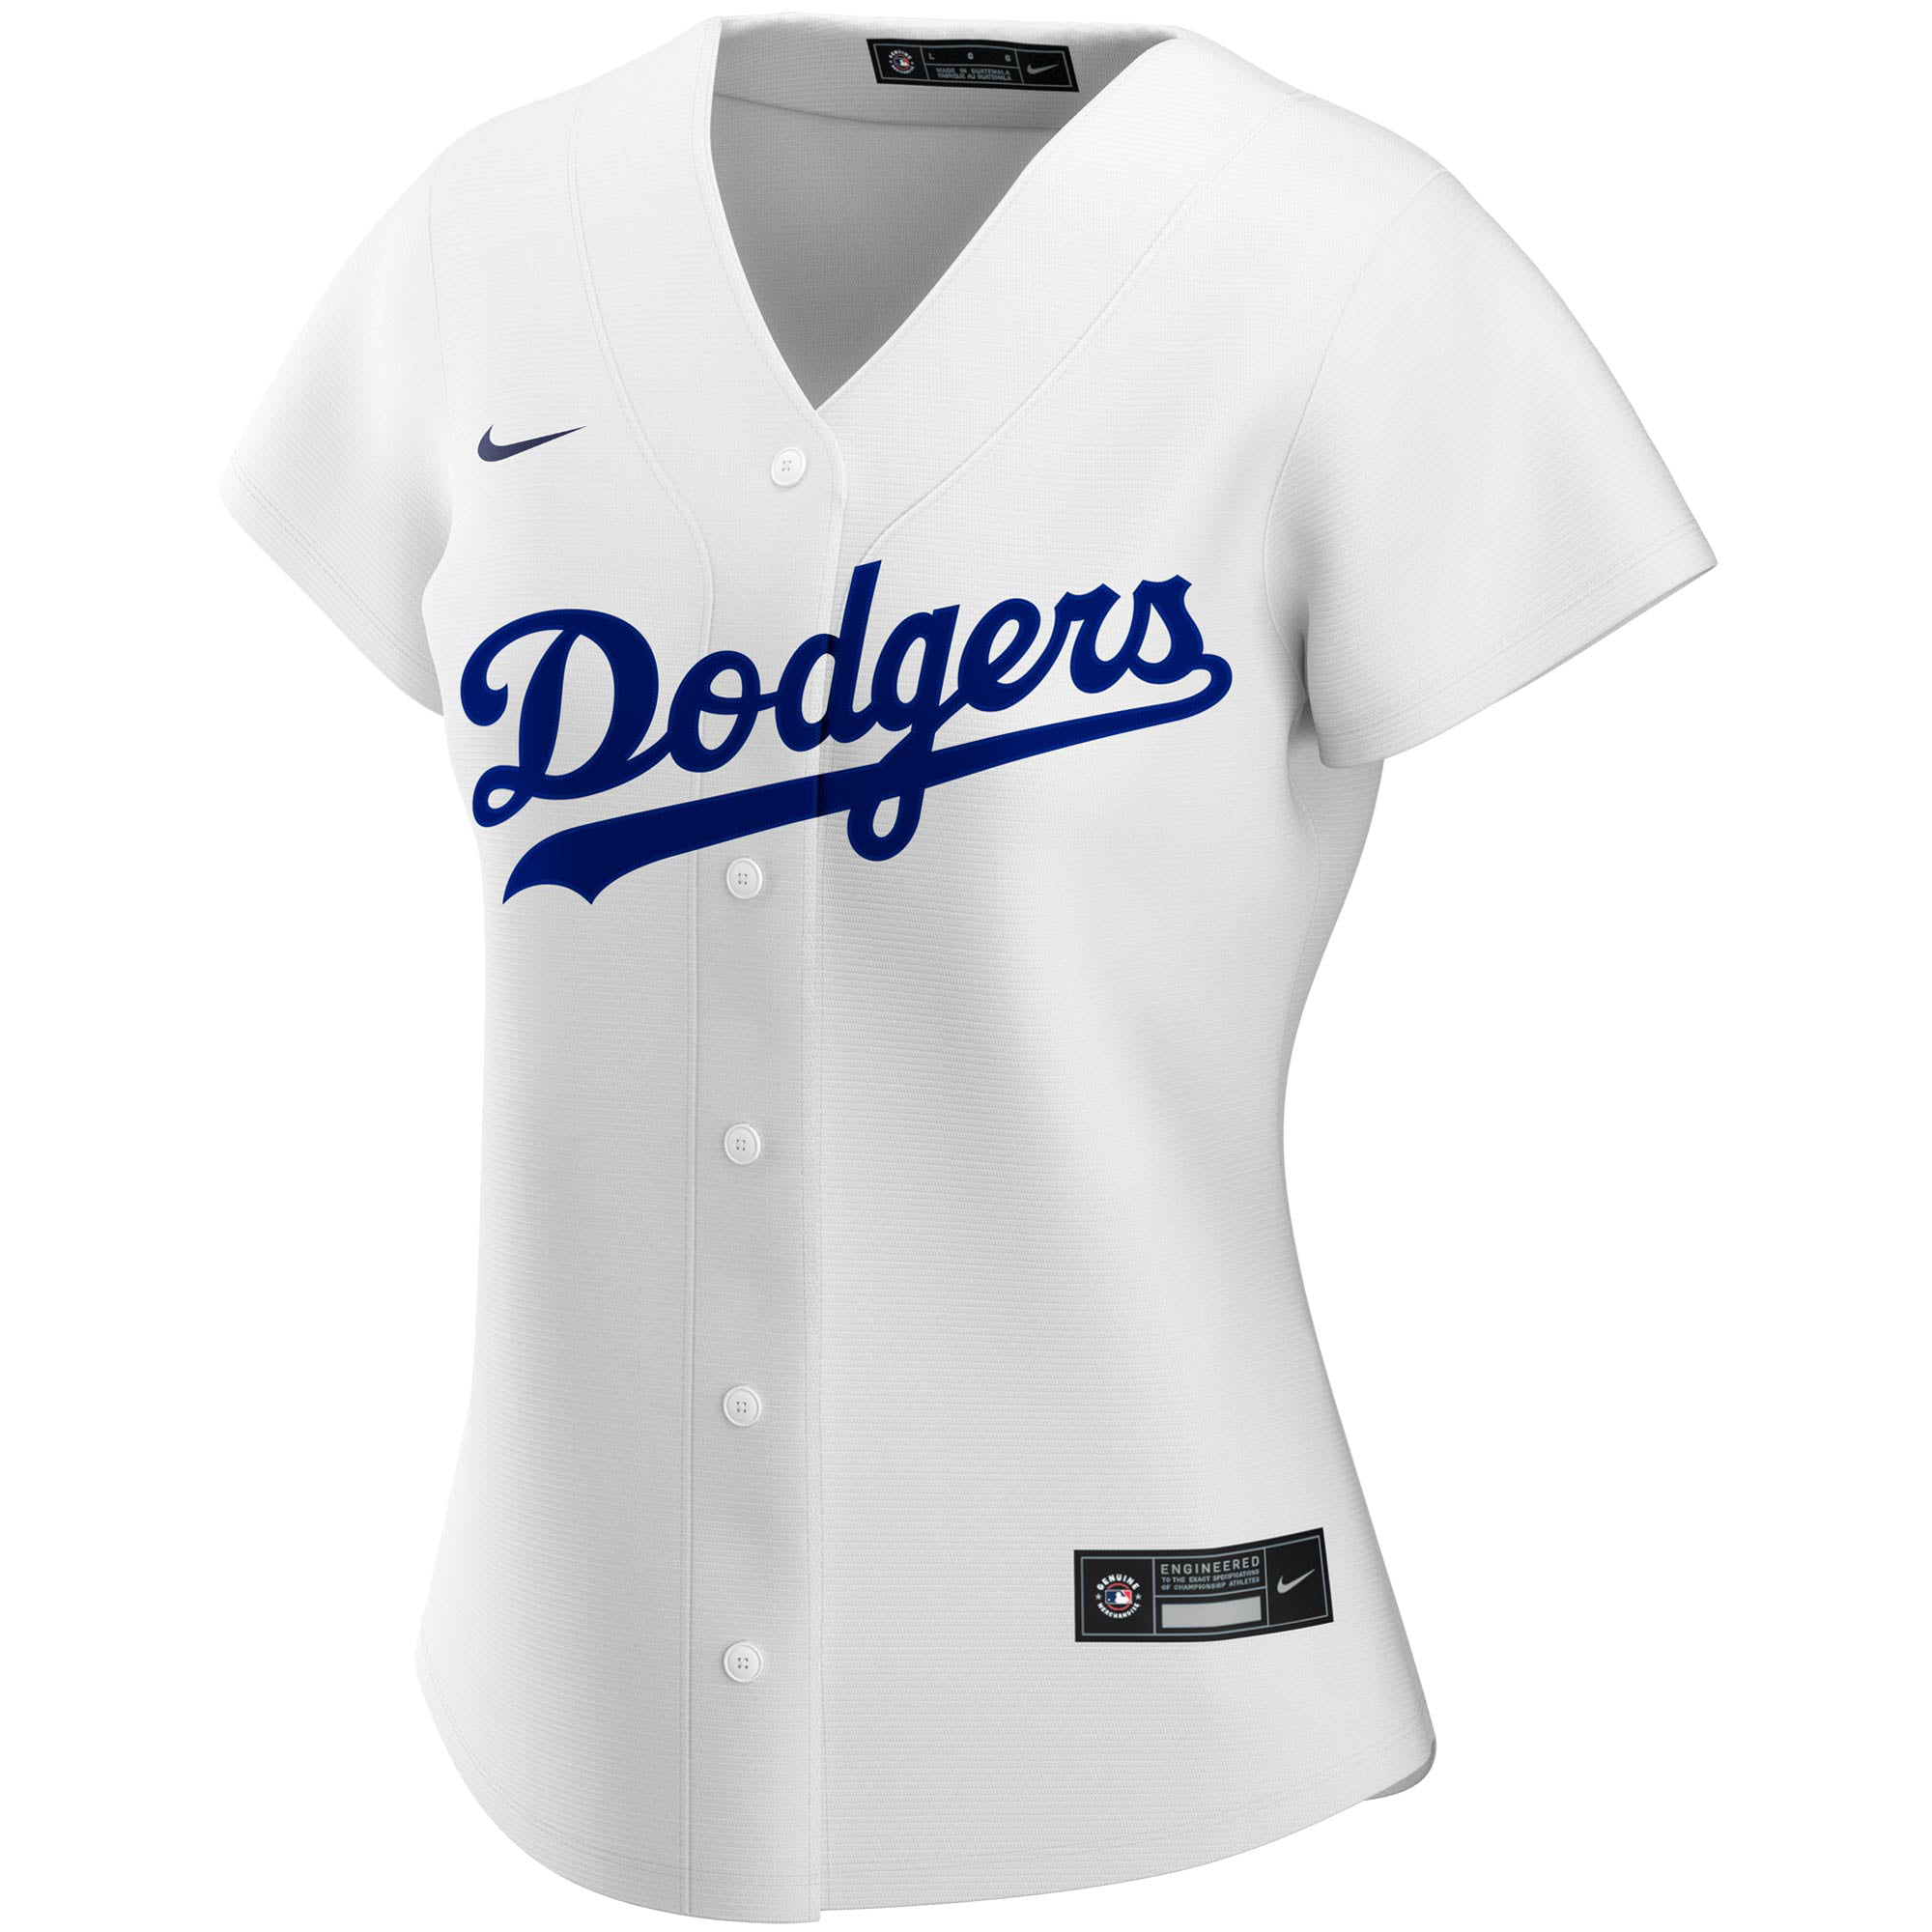 womens seager jersey